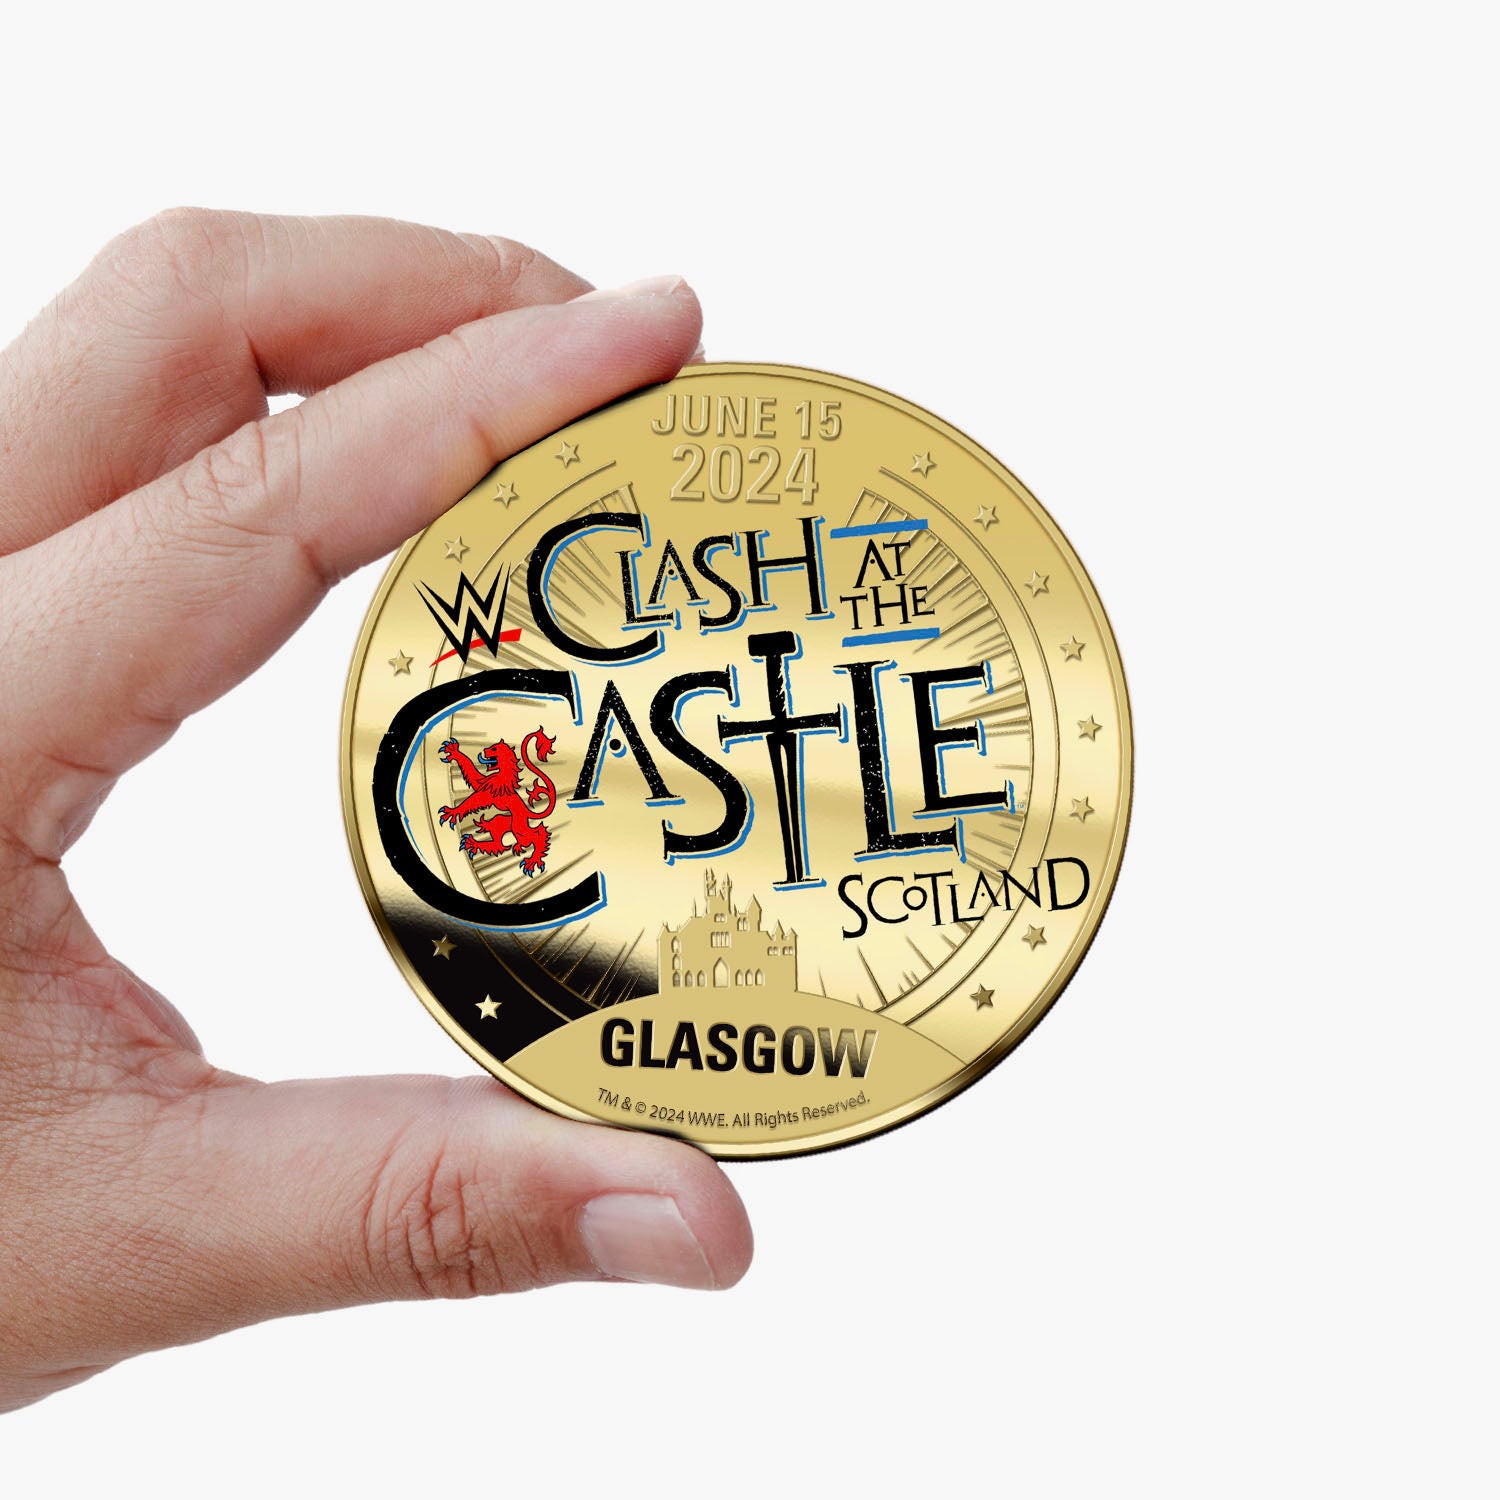 WWE Clash at the Castle Super Size Gold Luxe Edition